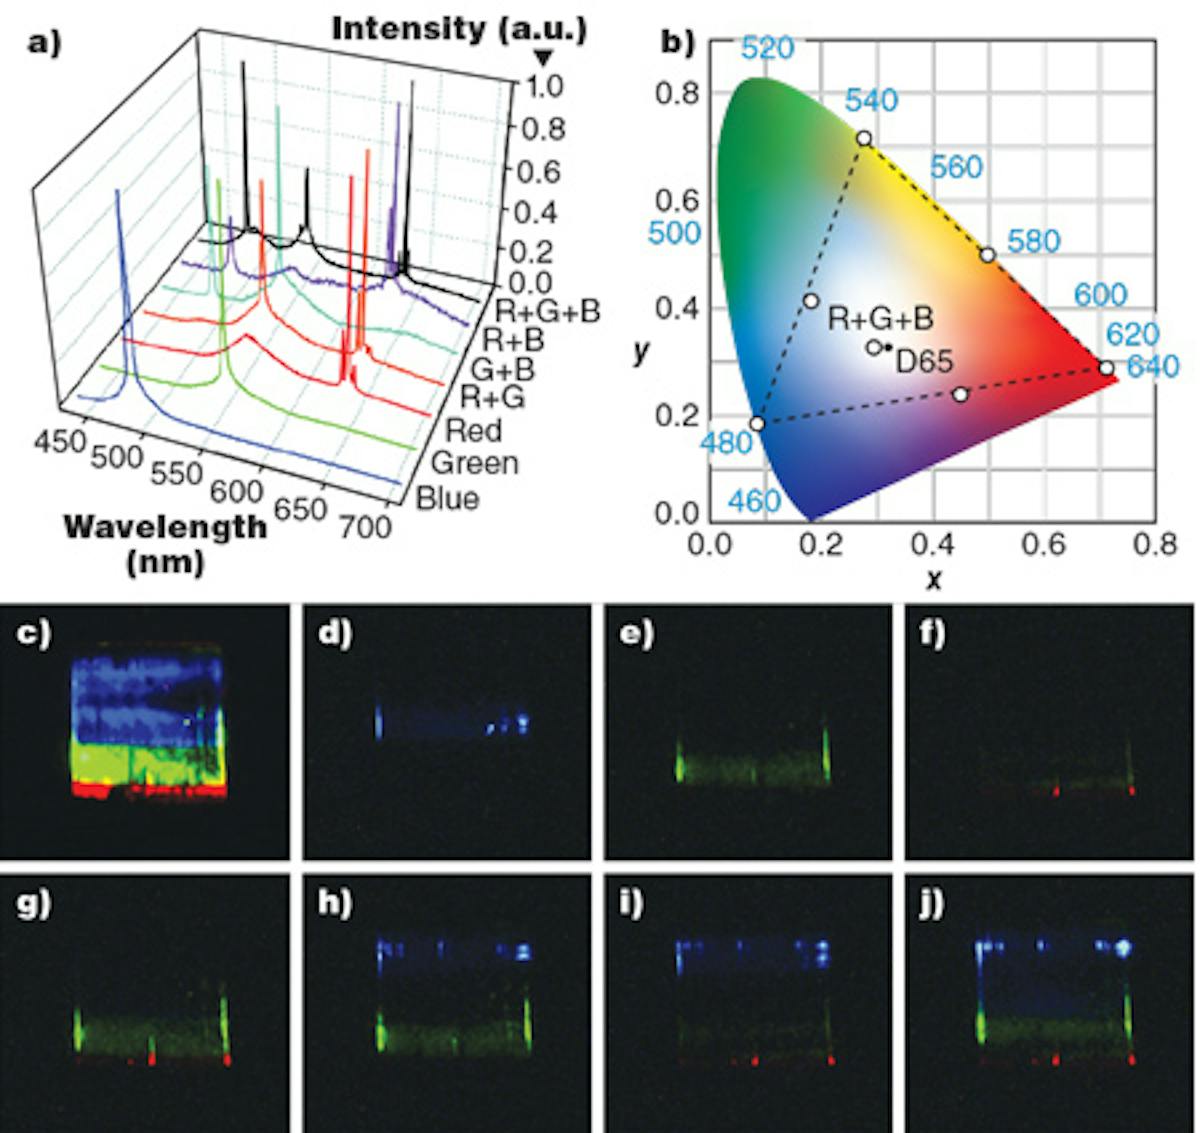 A multicolor laser made of segments containing varying ratios of the elements in the semiconductor zinc cadmium sulfide selenide (ZnCdSSe) can emit white light, single colors, or various combinations as seen in (a), which shows lasing spectra for various combinations. The chromaticity of the color combinations in (a) are shown in the CIE color diagram in (b); the white-light combination is very close to the CIE standard white illuminant D65. (c) shows below-threshold pumping of the device, while (d) through (j) show above-threshold pumping for the color combinations shown in (a). The scale bar in (c) is 20 &mu;m long.